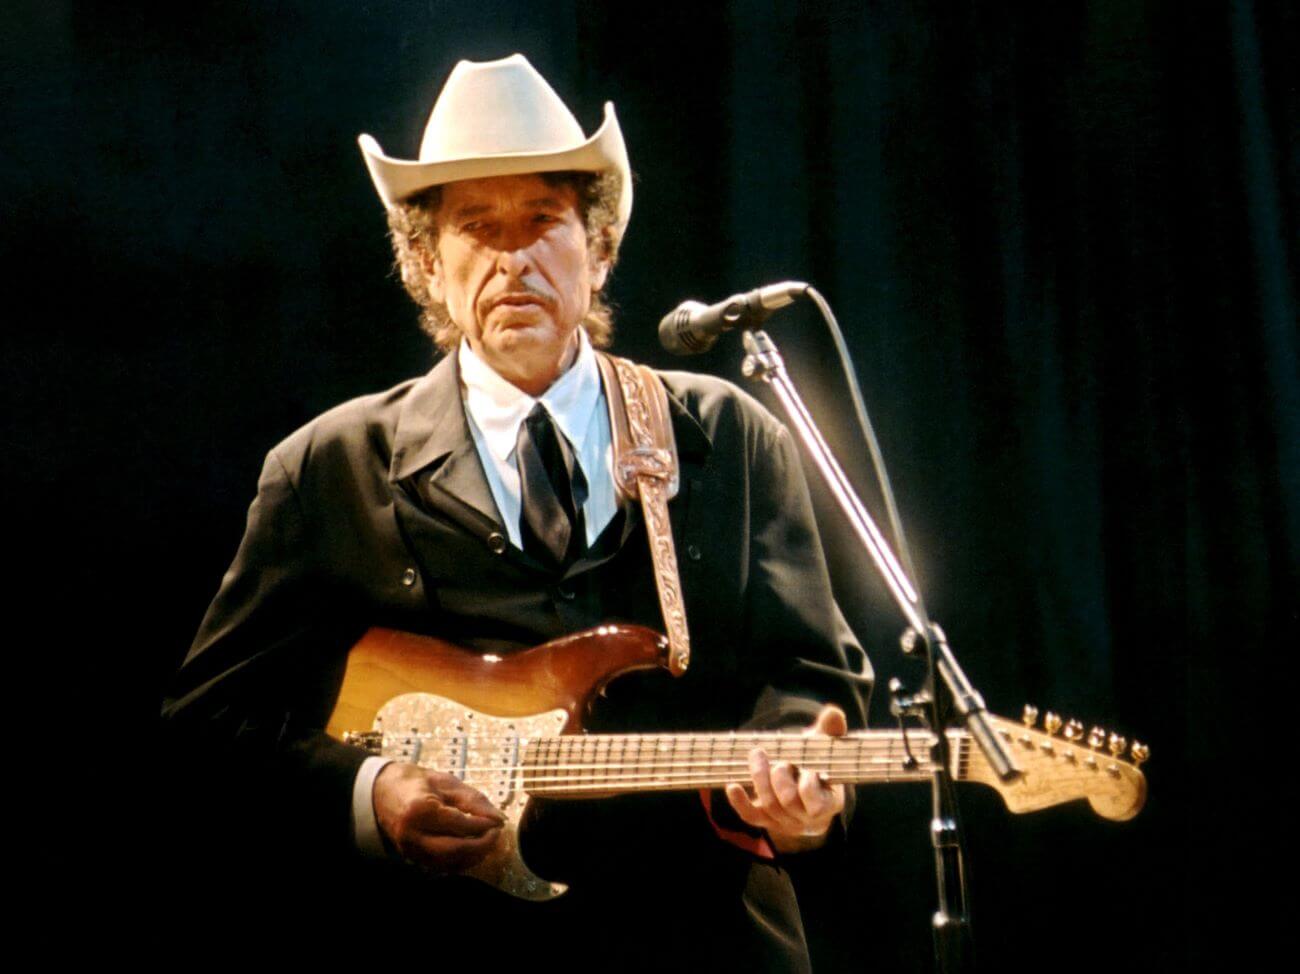 Bob Dylan wears a cowboy hat and holds a guitar. He stands in front of a microphone.